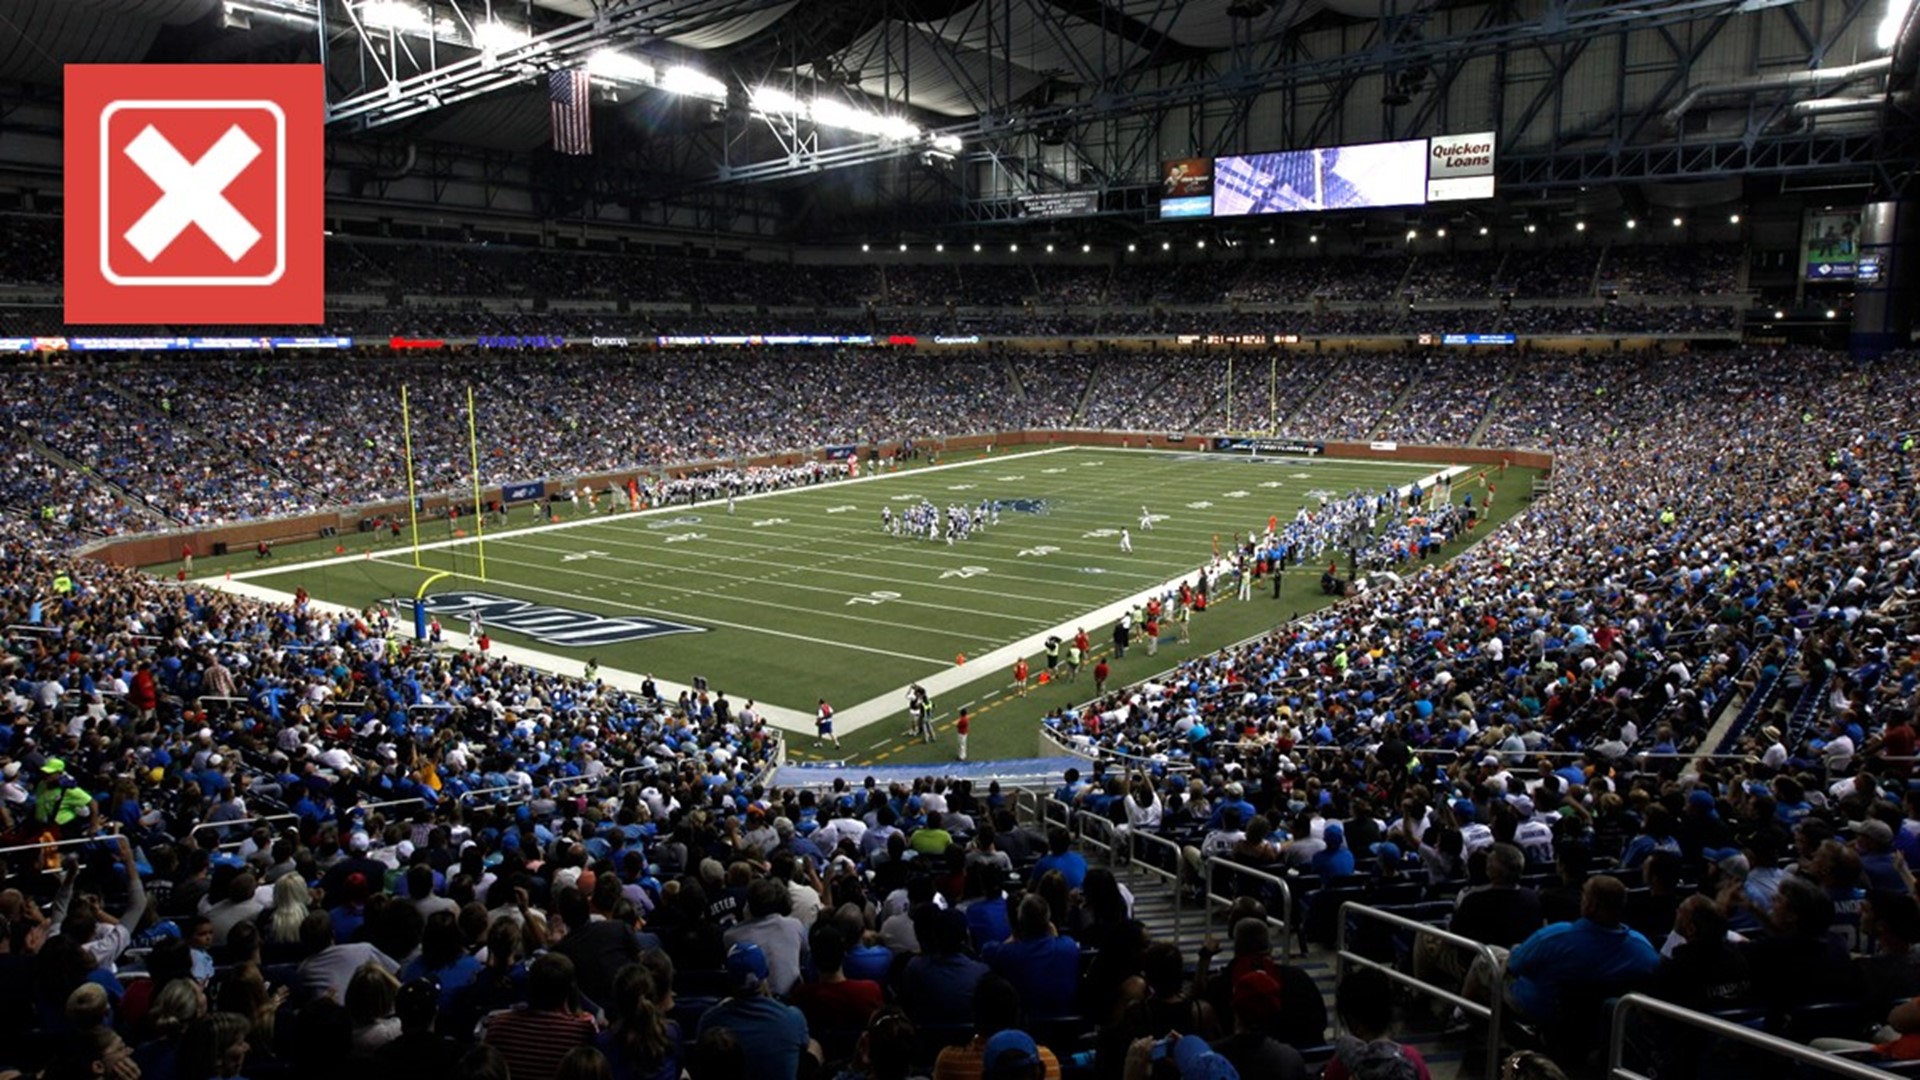 NFL commissioner Roger Goodell expects all stadiums to have full capacity this upcoming season.